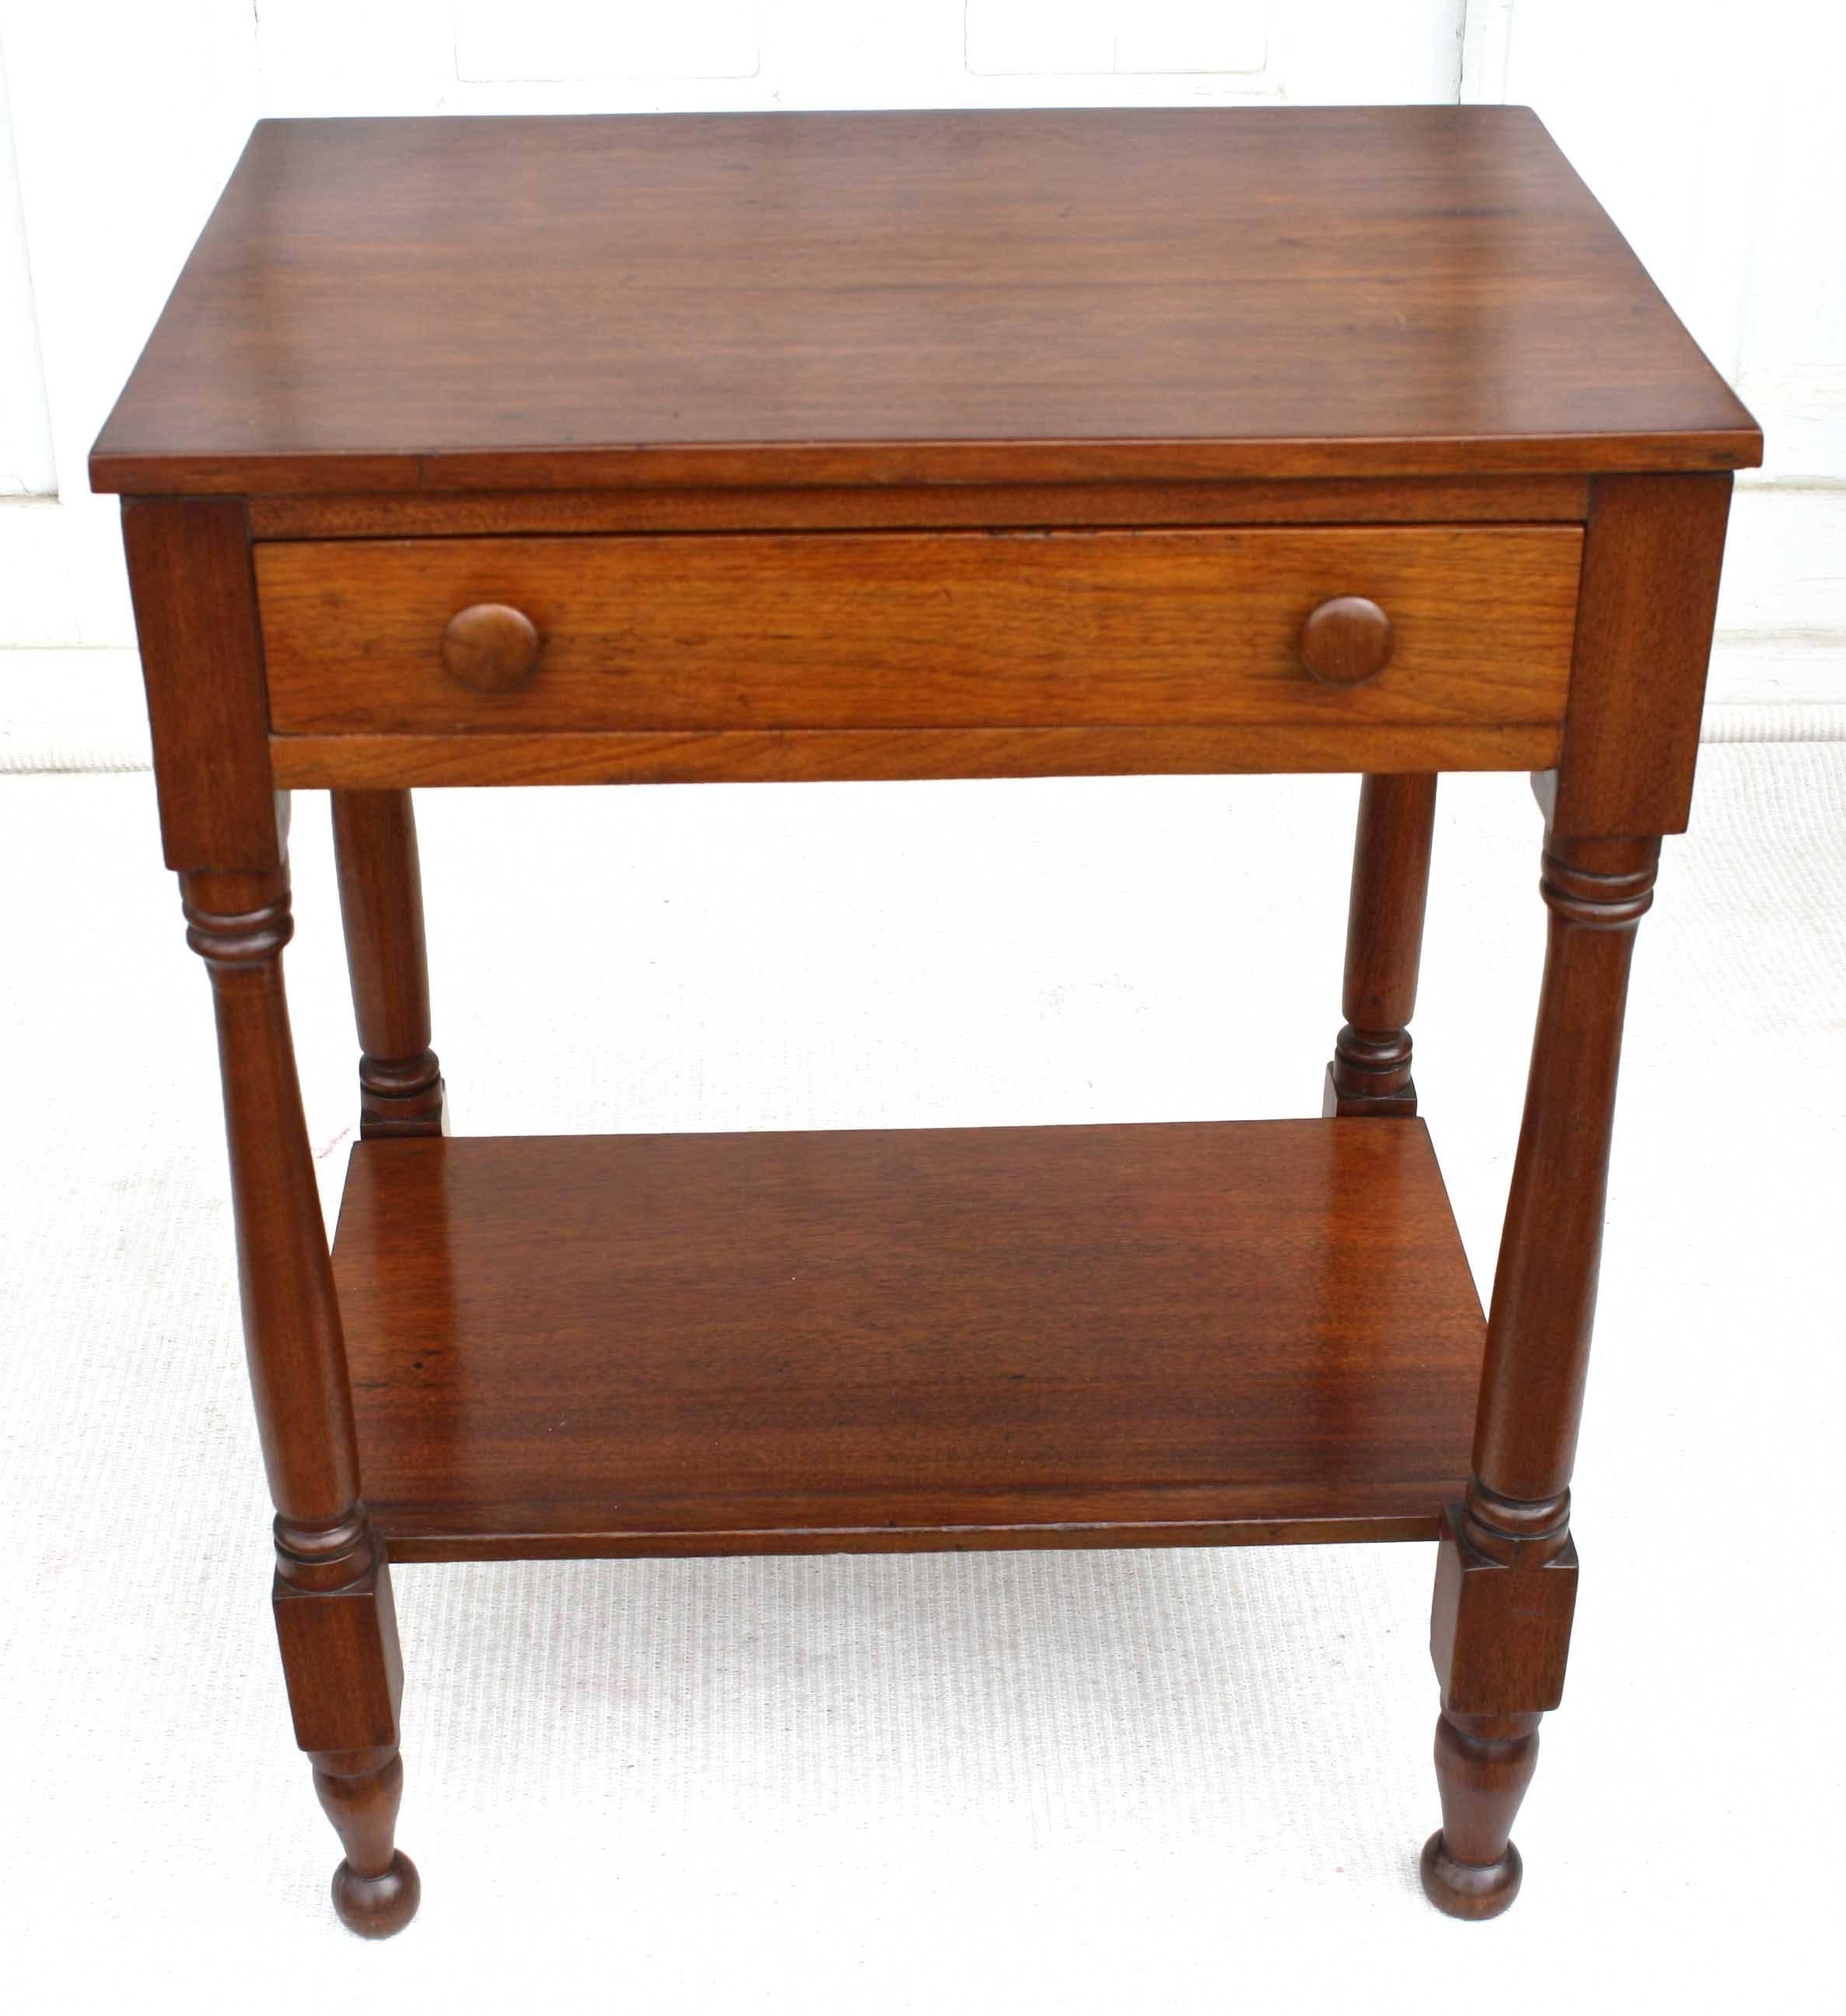 A single-drawered bedside table in the 'country' American Sheraton manner, with a stretcher-level chamber pot shelf. Its four legs are ring turned and 'blocked'. Pine secondary woods. This table may also serve chairside or at sofa-end, freestanding